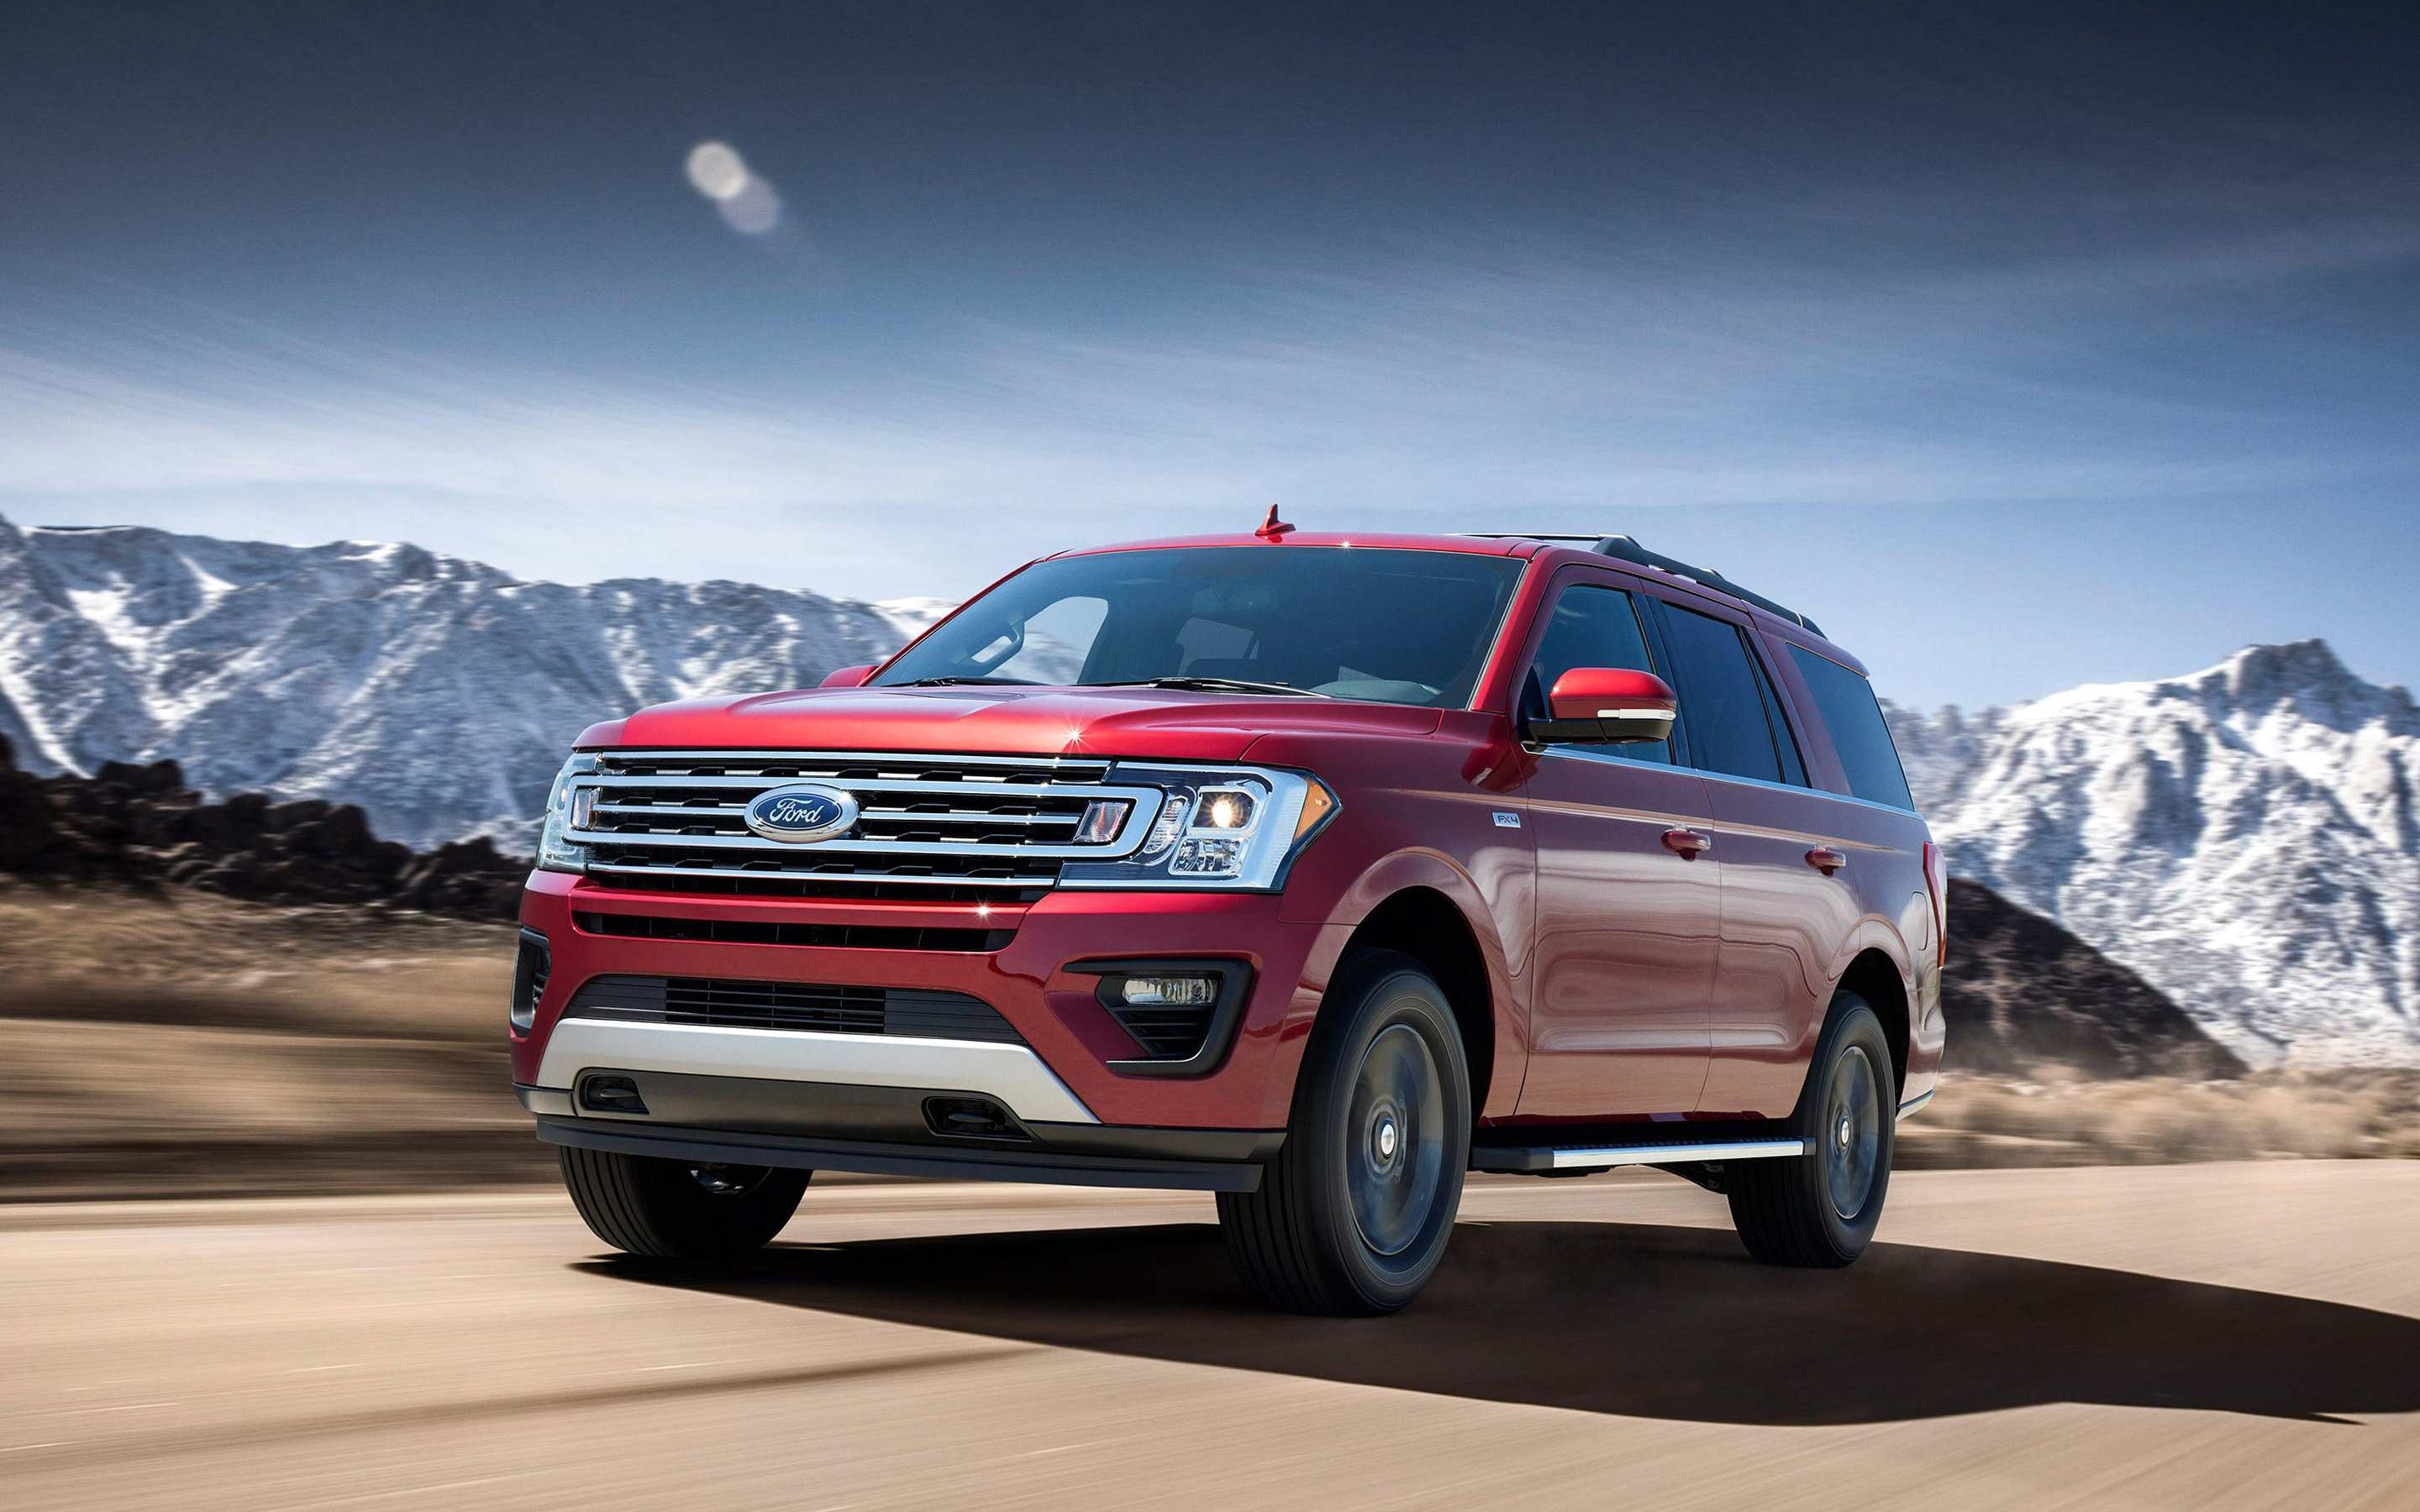 Ford Expedition, FX4 model, American SUV, High quality images, 2880x1800 HD Desktop